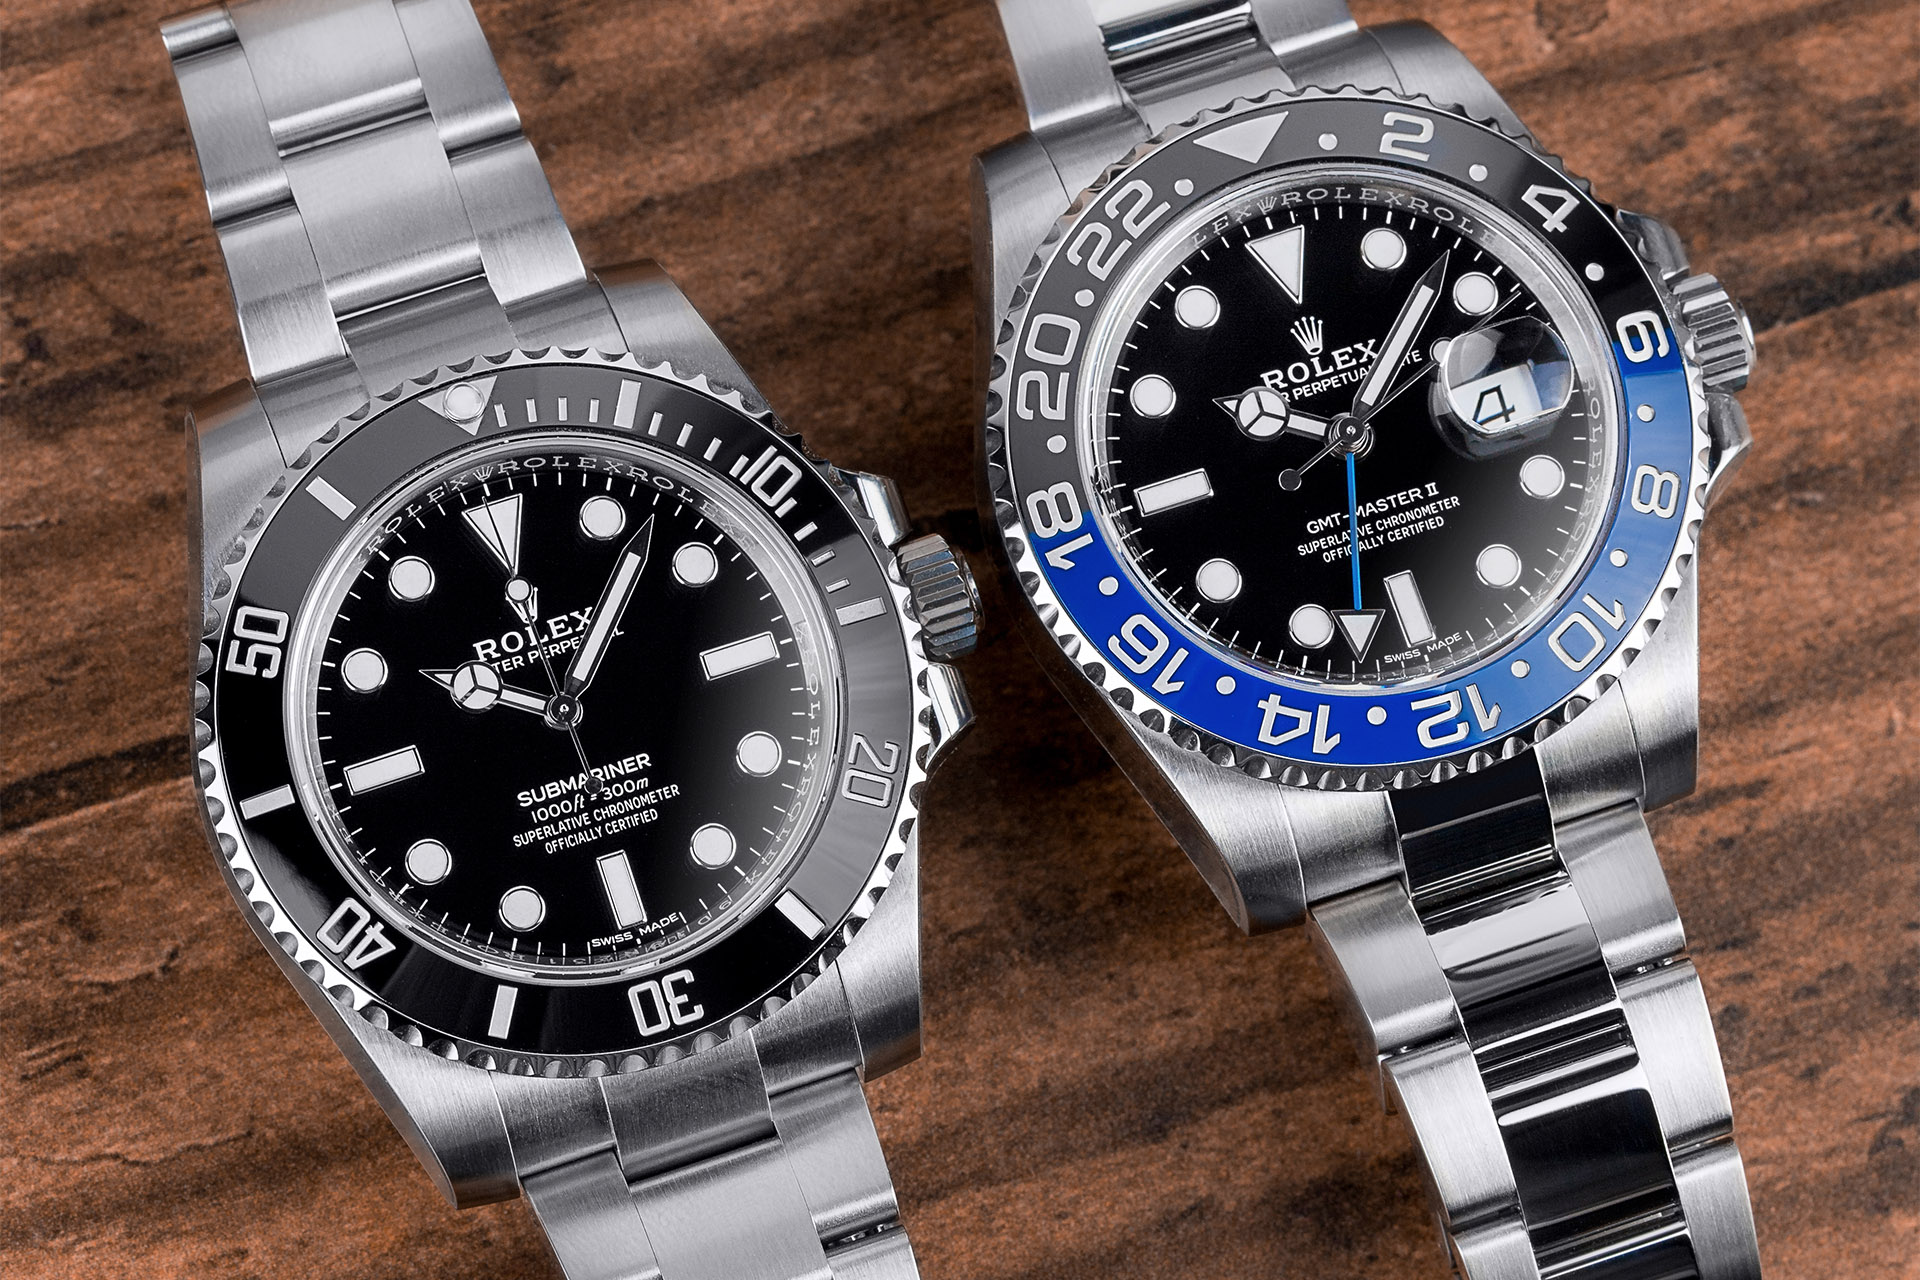 SHOULD YOU SELL, TRADE OR CONSIGN YOUR WATCH? AN EXPERT GUIDE